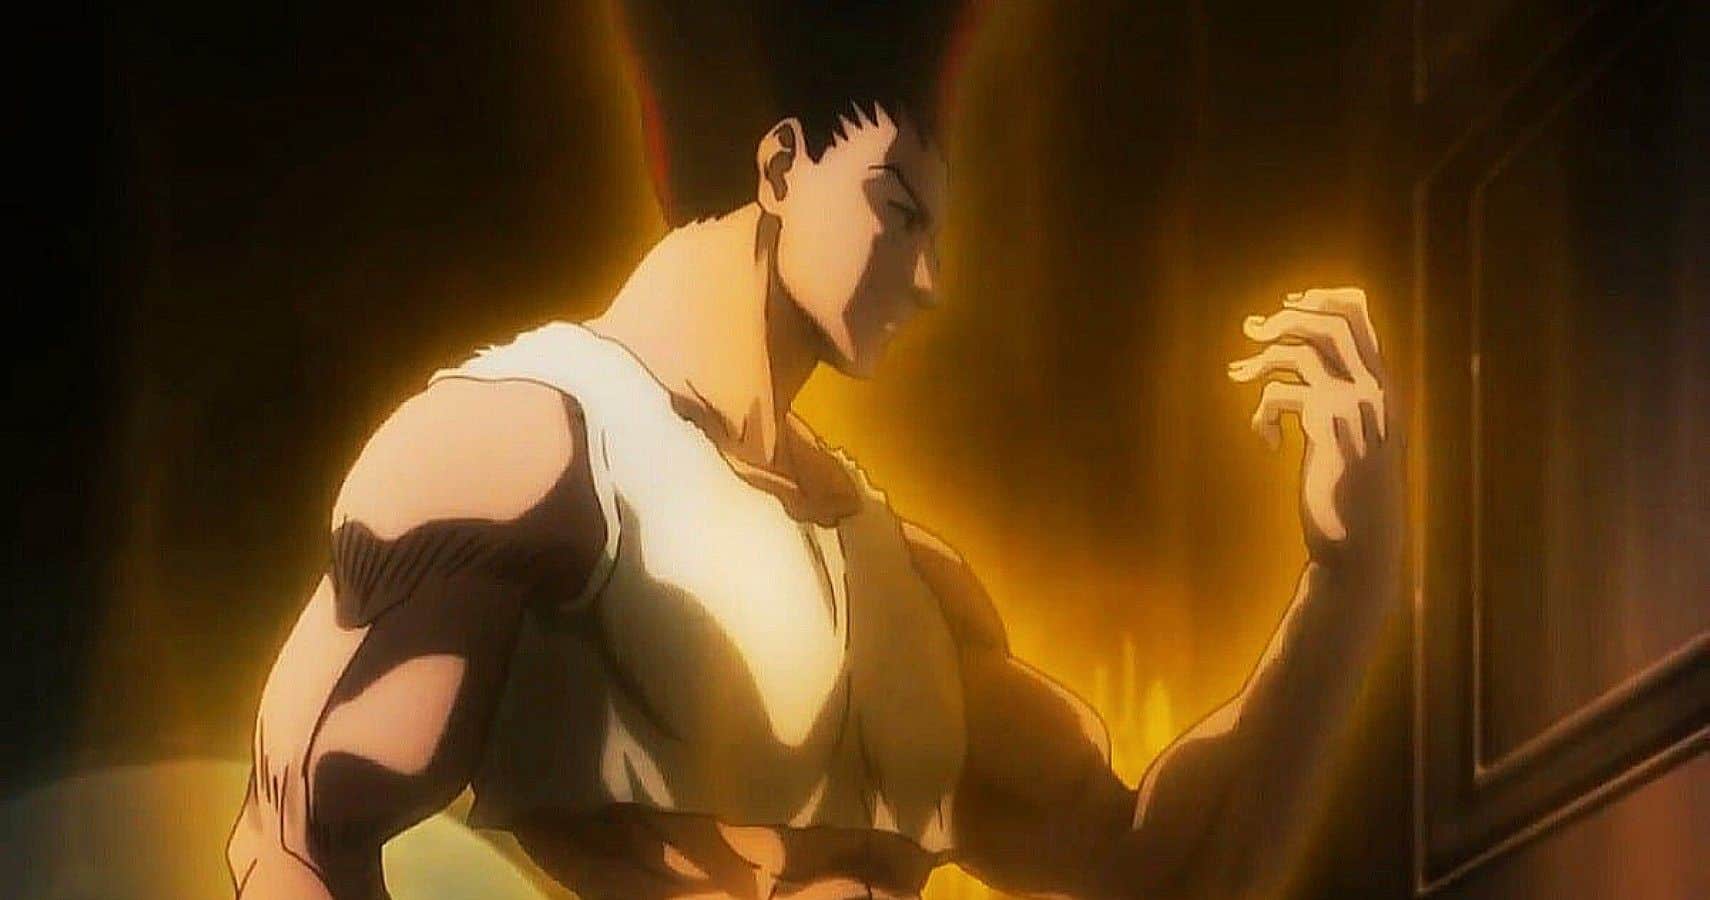 10 most powerful Hunters in Hunter X Hunter, ranked